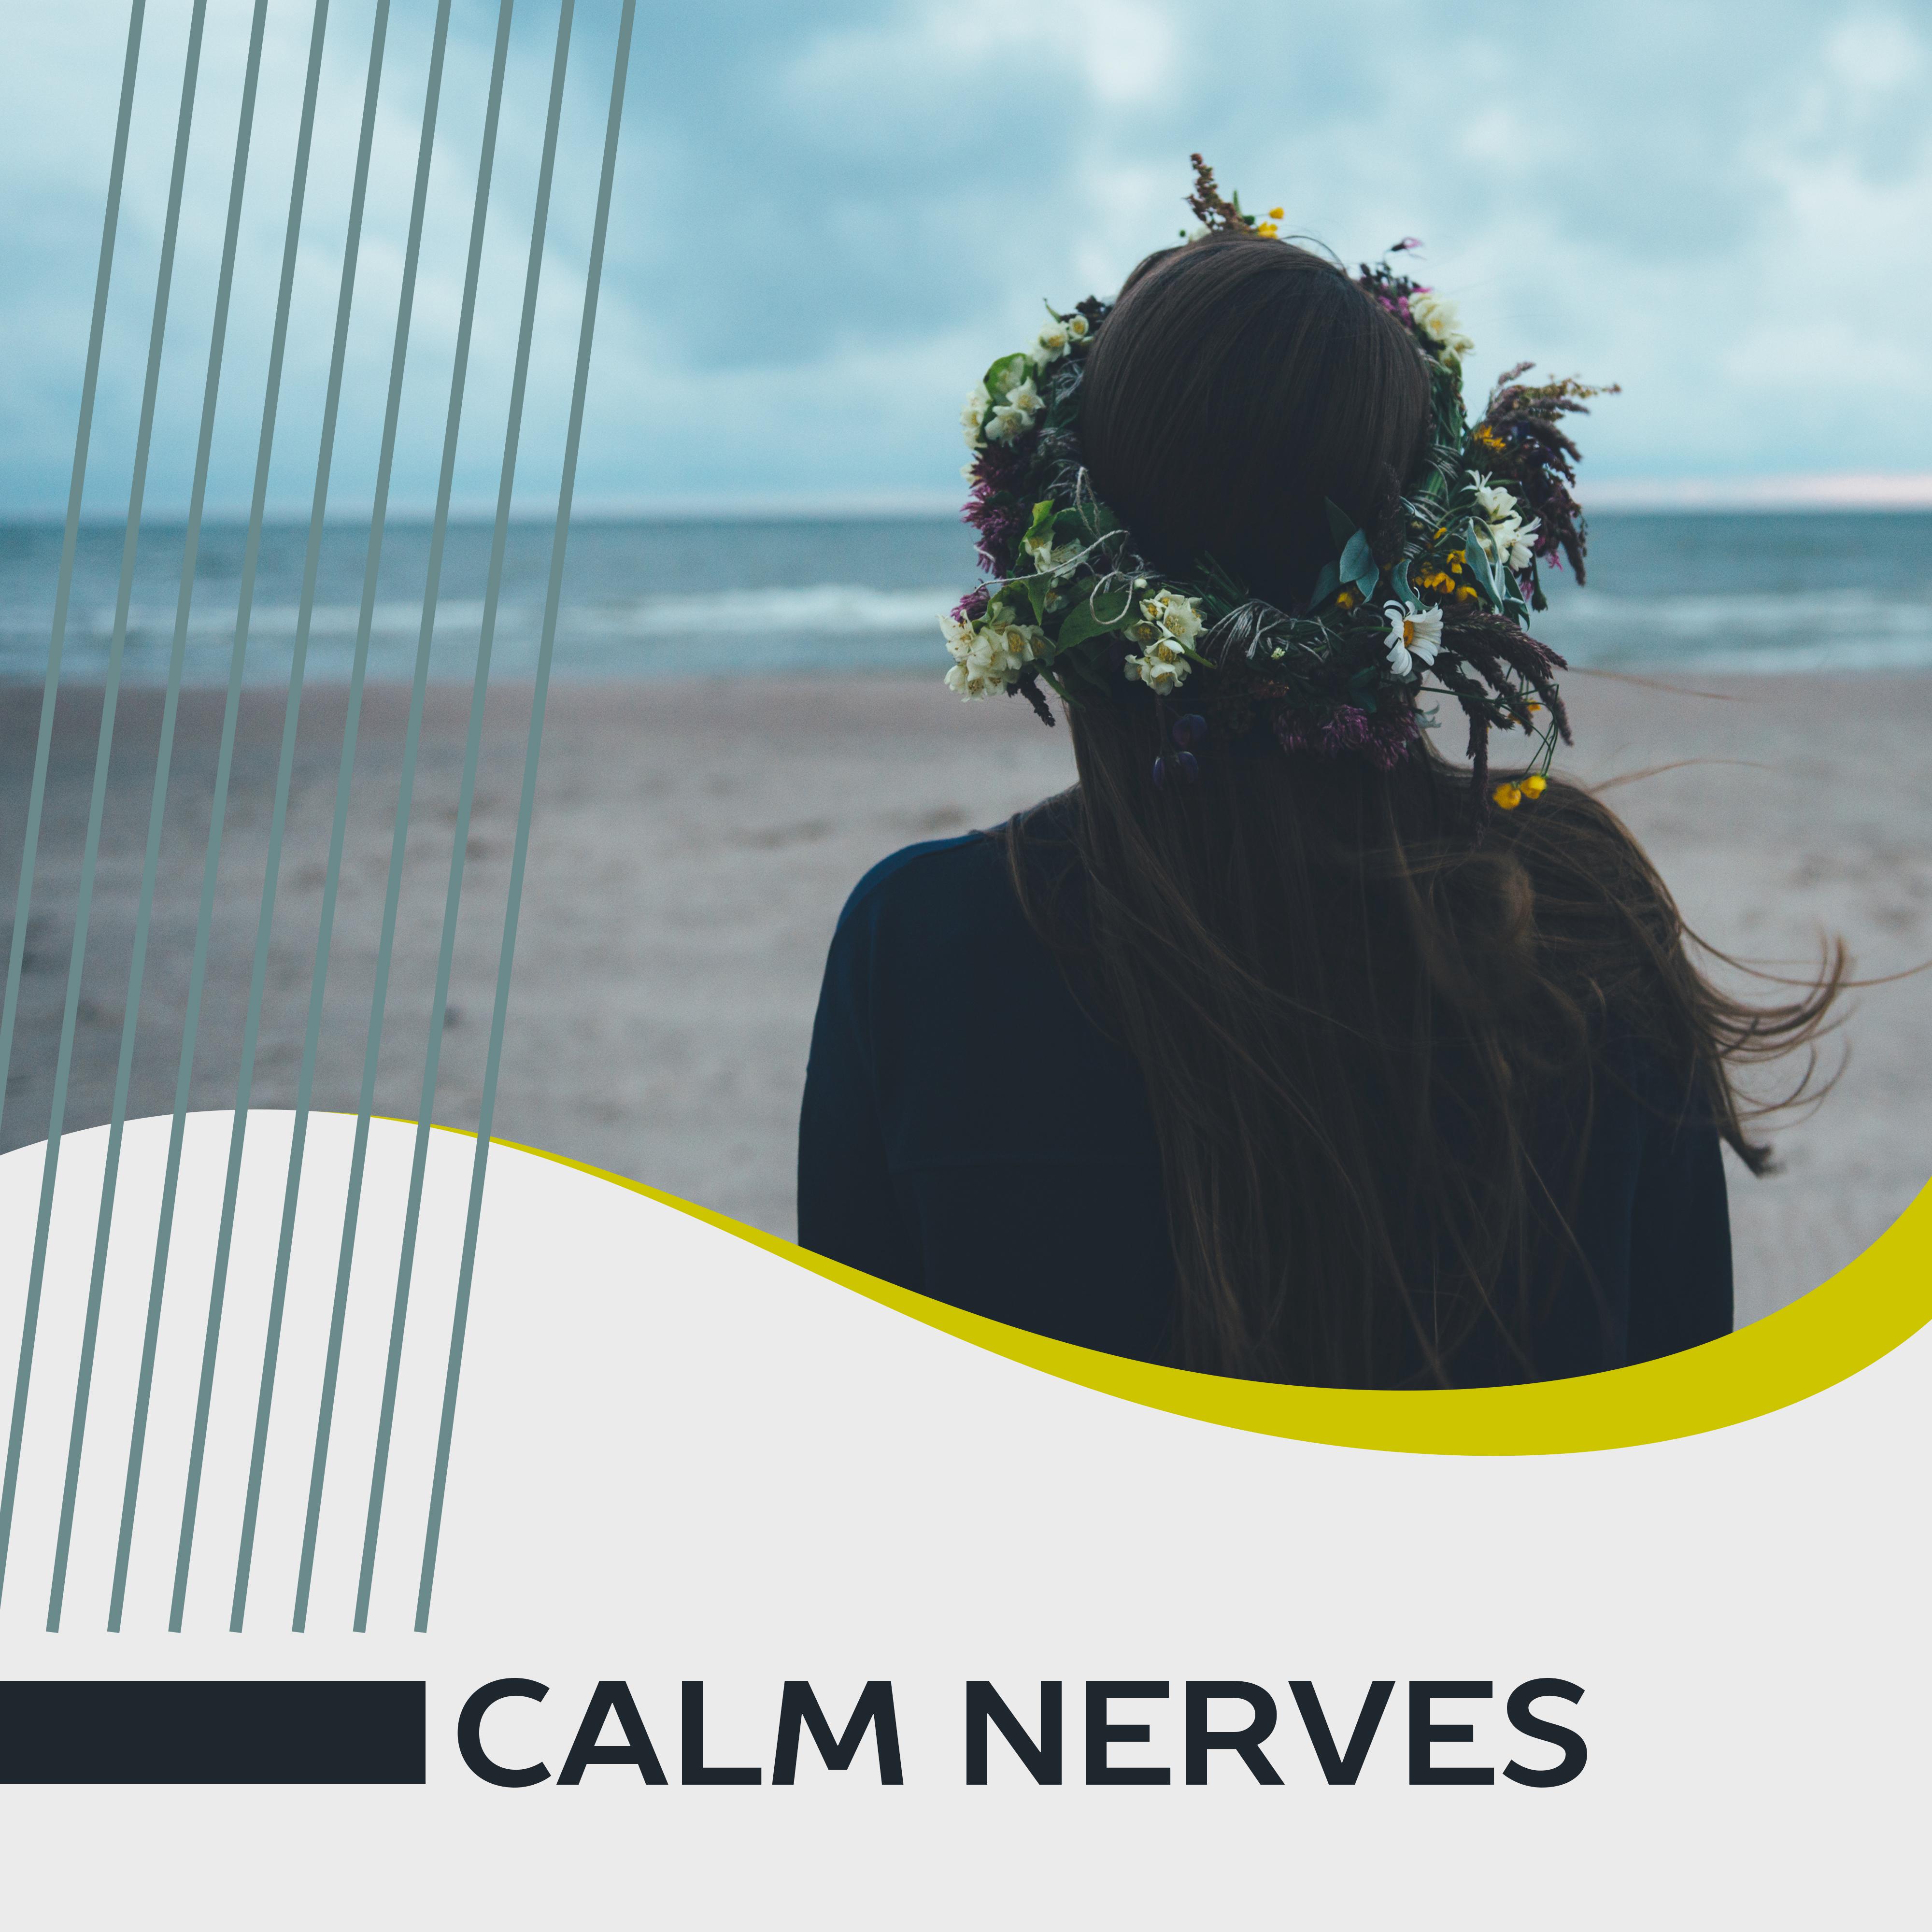 Calm Nerves  Peaceful Sounds of Nature, Relaxing Music, Relief Stress, Reduce Anxiety, Rest, New Age